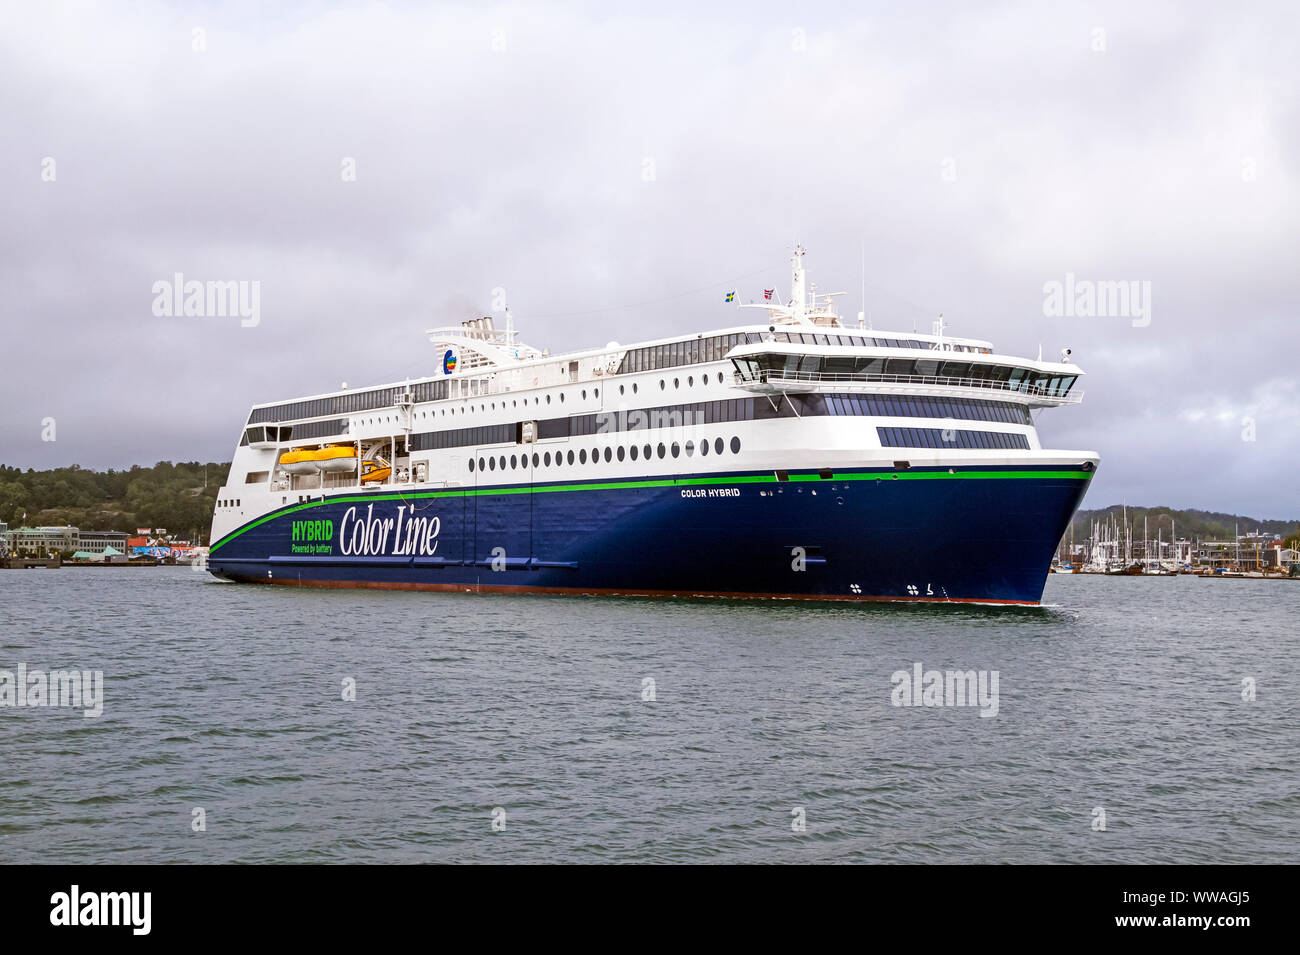 New color line car and passenger ferry Color Hybrid in harbour of Sandefjord Norway Europe Stock Photo